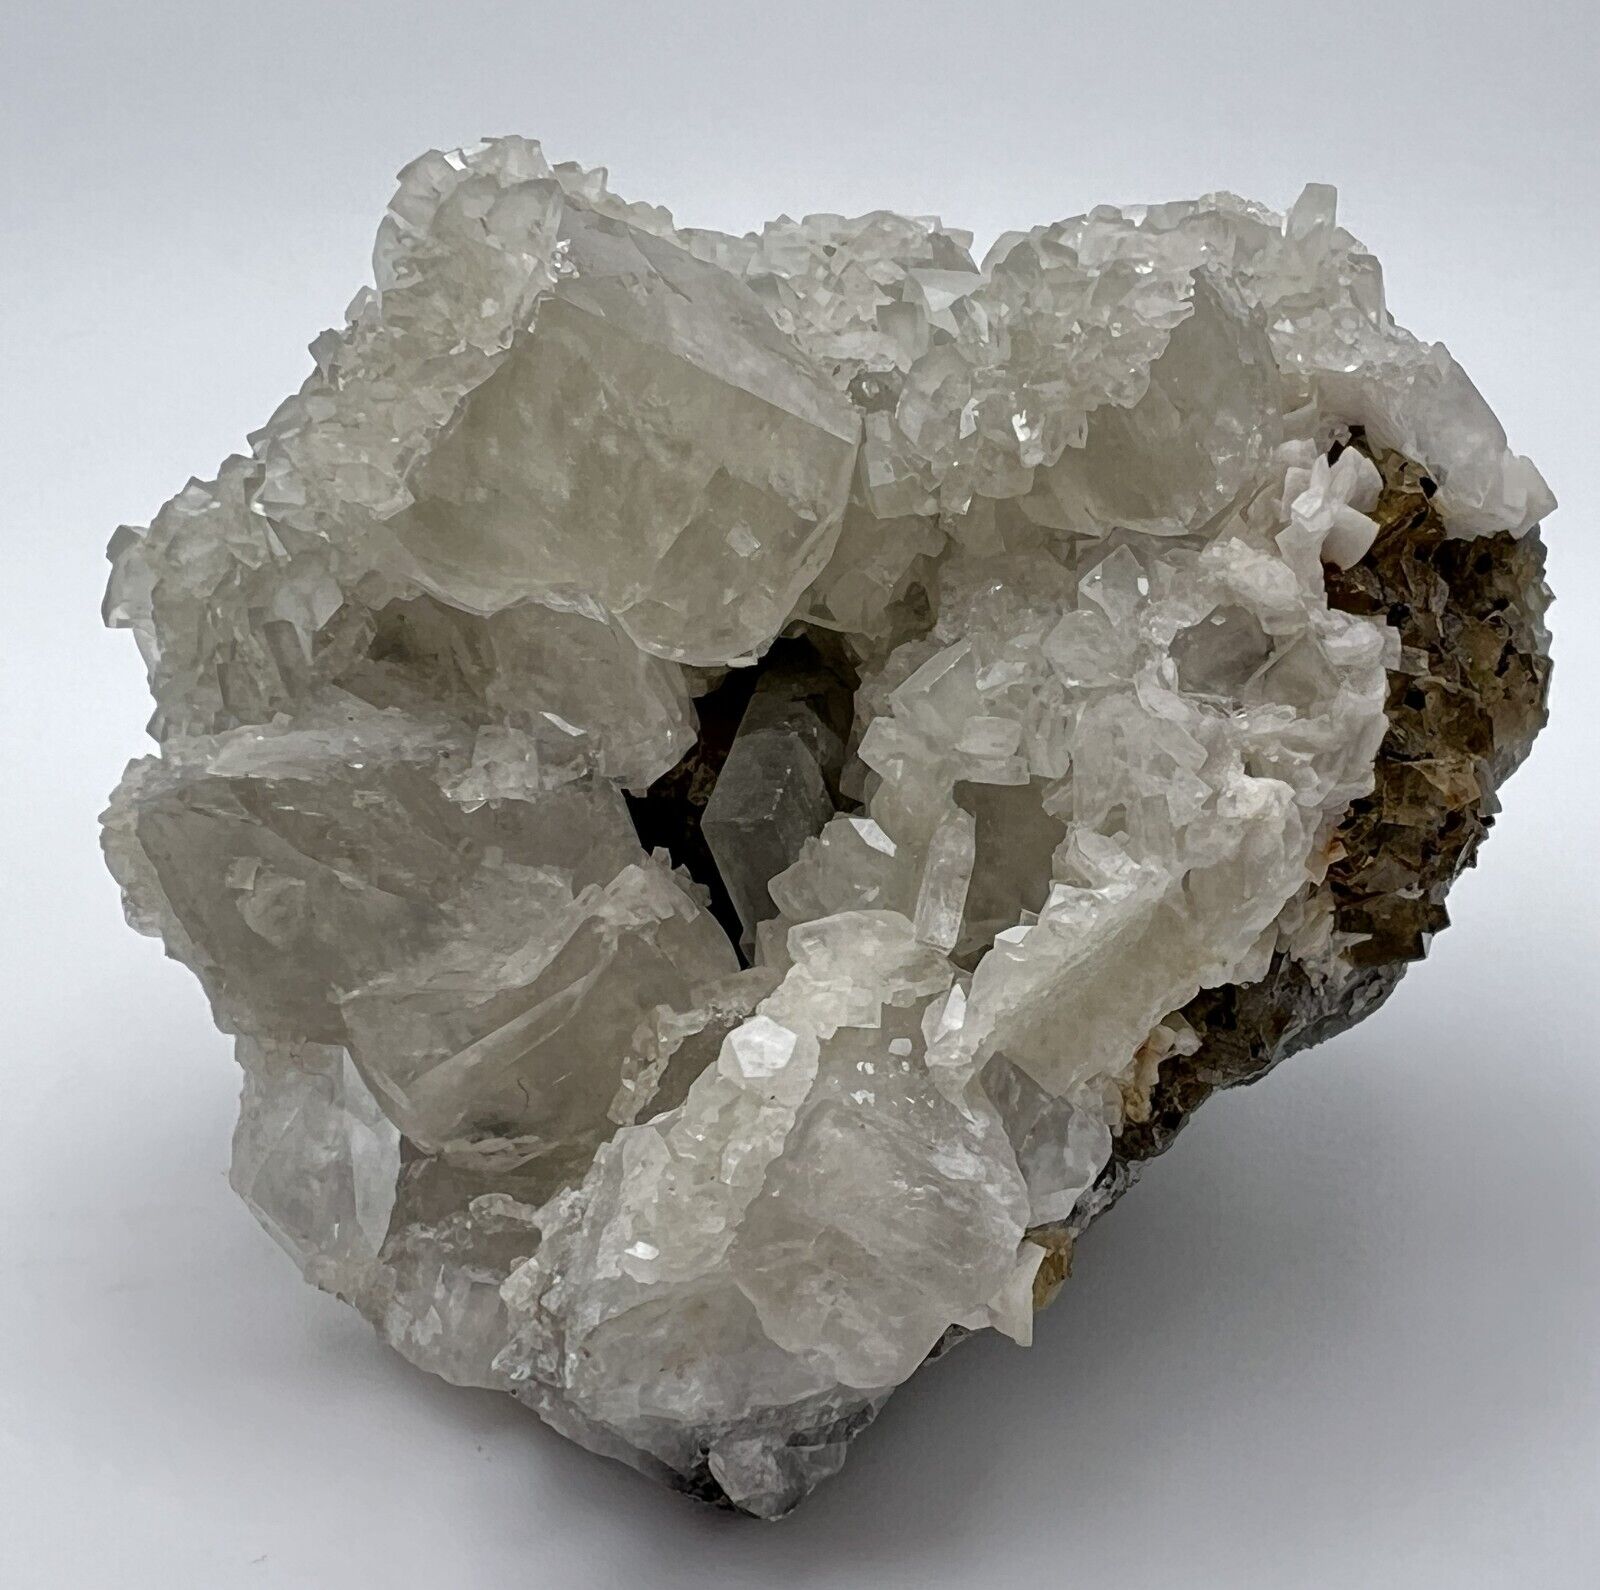 Stunning Barite, Calcite and Fluorite Combo from Moscona Mine, Spain